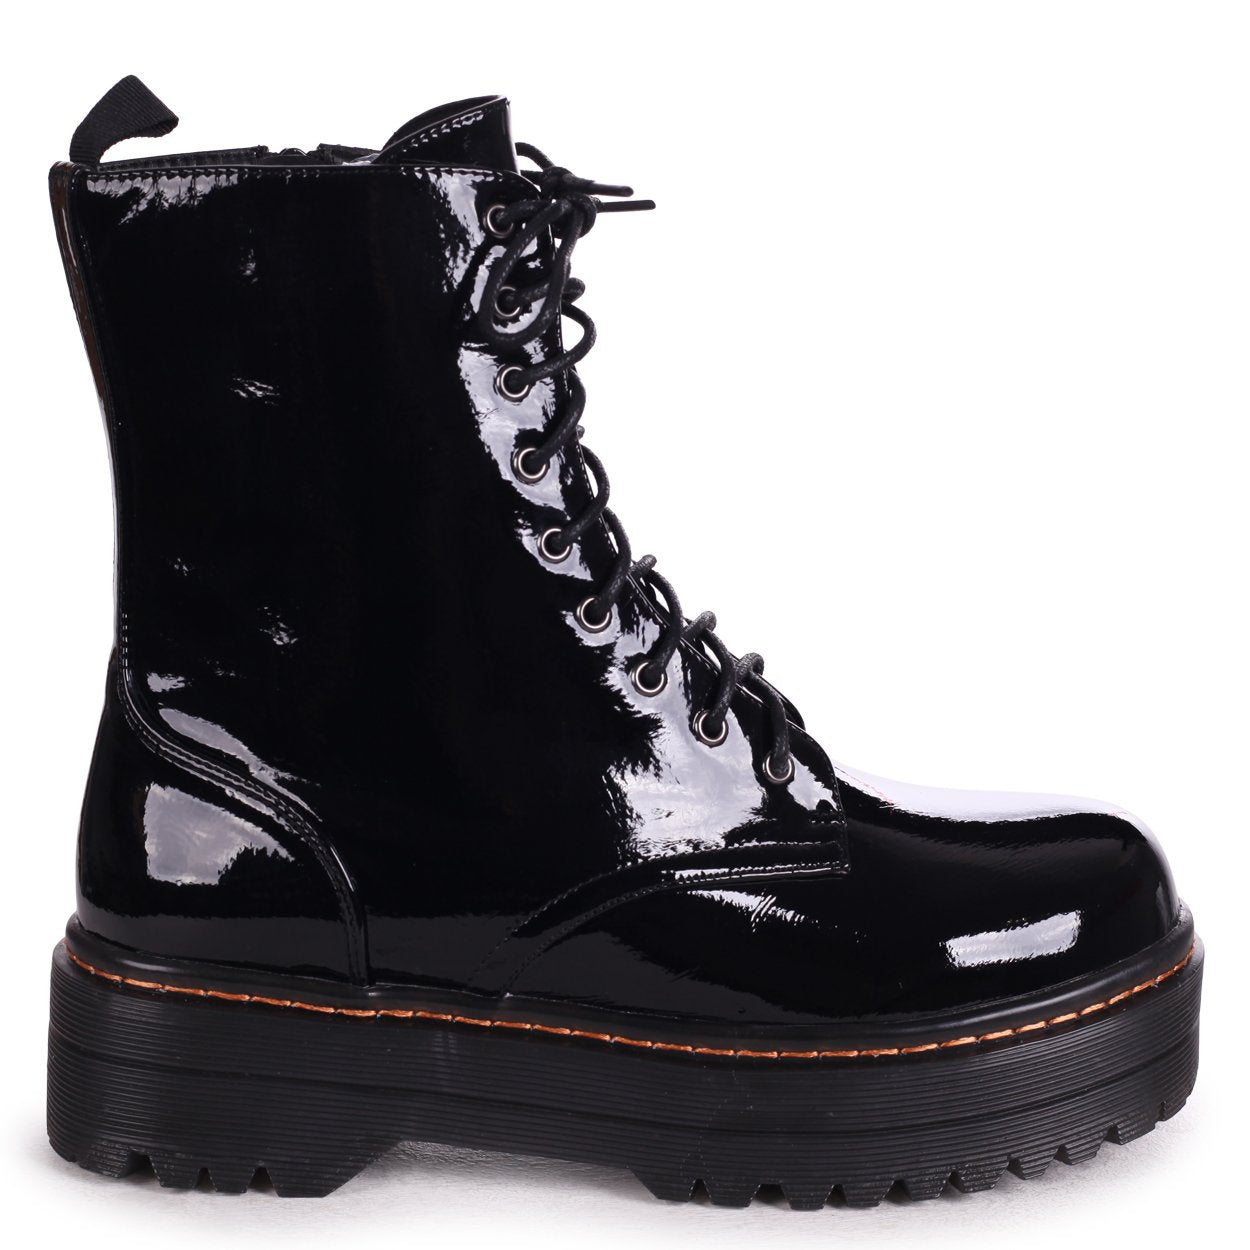 Black Patent Military Style Lace Up 